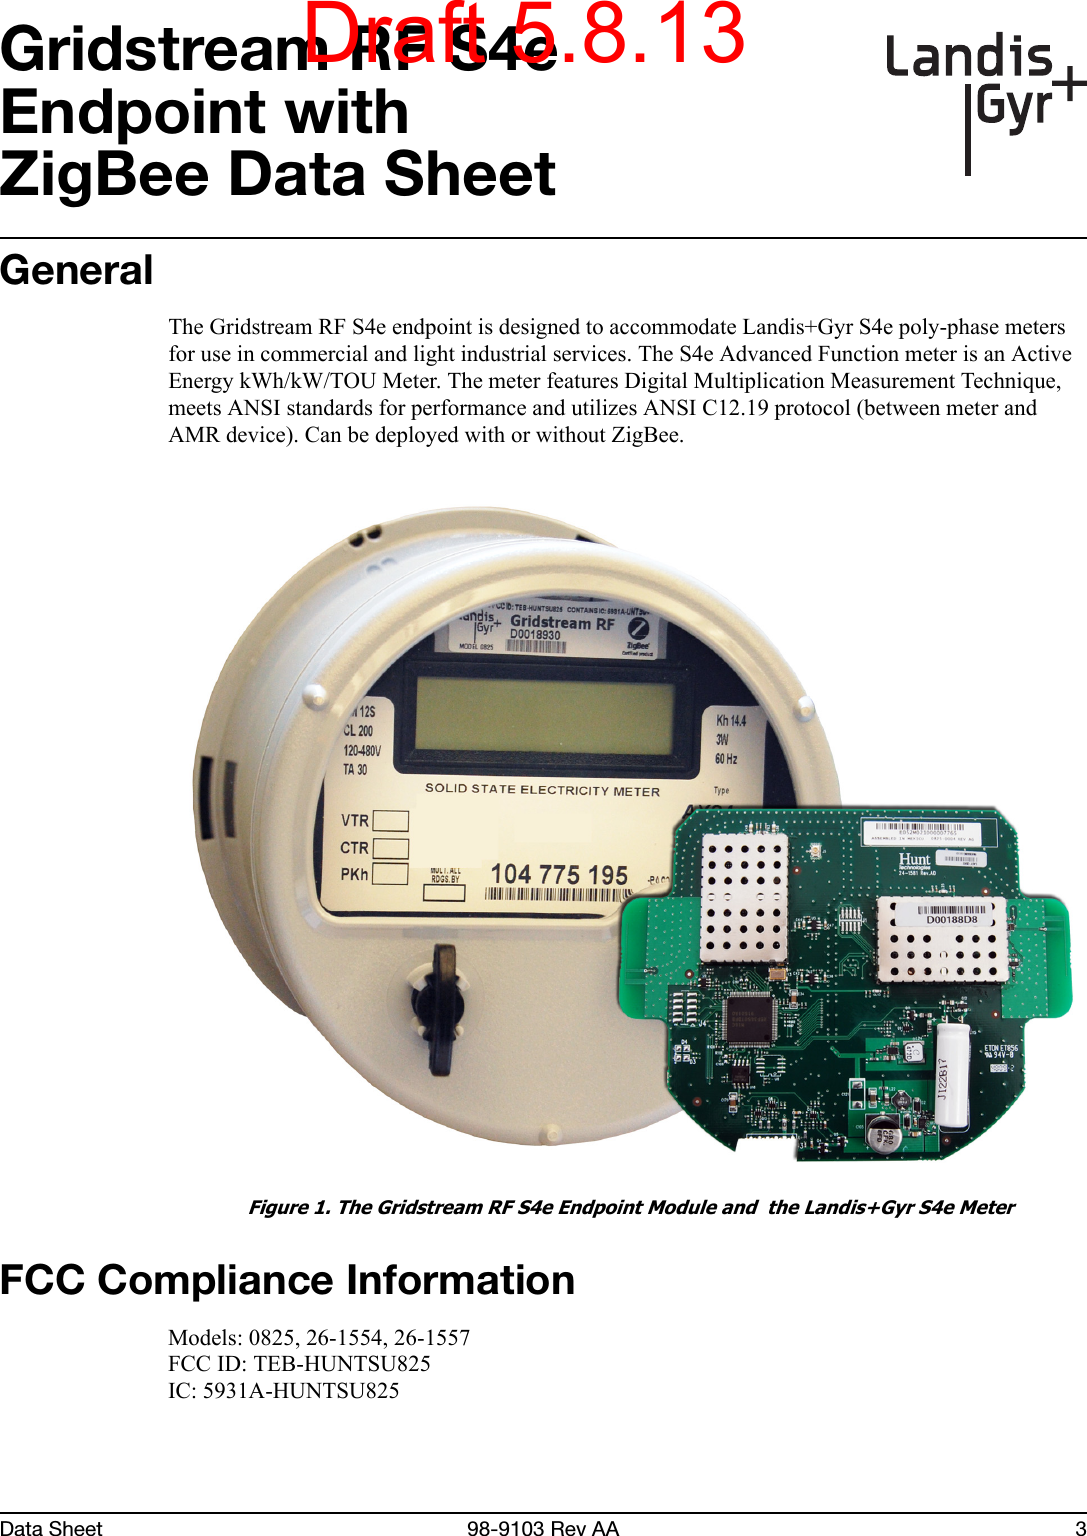 Data Sheet 98-9103 Rev AA 3Gridstream RF S4eEndpoint withZigBee Data SheetGeneralThe Gridstream RF S4e endpoint is designed to accommodate Landis+Gyr S4e poly-phase meters for use in commercial and light industrial services. The S4e Advanced Function meter is an Active Energy kWh/kW/TOU Meter. The meter features Digital Multiplication Measurement Technique, meets ANSI standards for performance and utilizes ANSI C12.19 protocol (between meter and AMR device). Can be deployed with or without ZigBee. Figure 1. The Gridstream RF S4e Endpoint Module and  the Landis+Gyr S4e MeterFCC Compliance InformationModels: 0825, 26-1554, 26-1557FCC ID: TEB-HUNTSU825IC: 5931A-HUNTSU825Draft 5.8.13